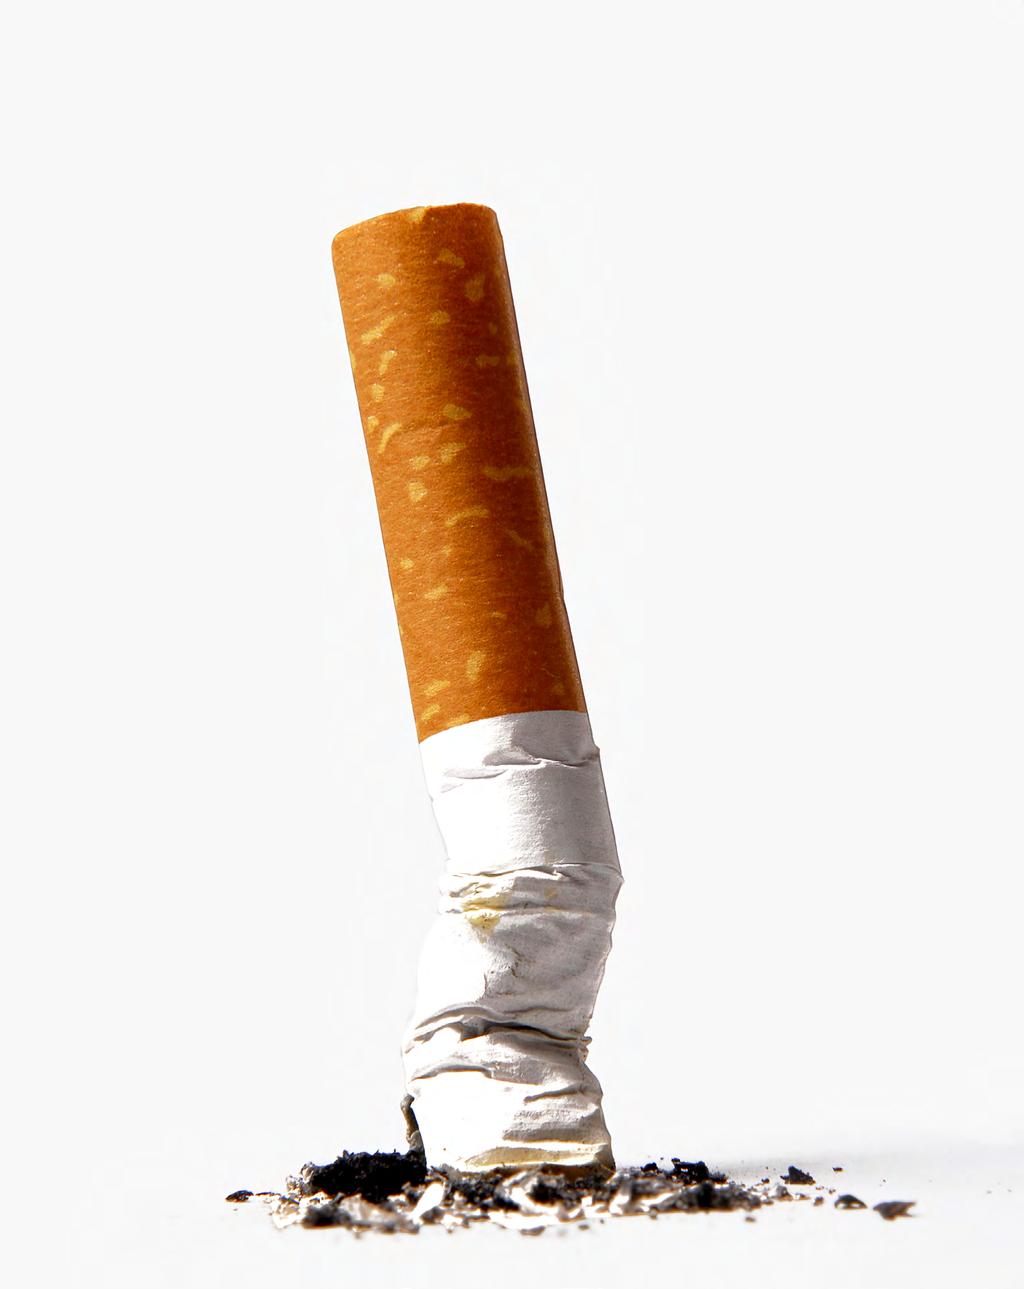 2 INTRODUCTION TO CIGARETTE BUTTS Introduction to cigarette butts a blight on Scotland s streets Walk through any town or city in Scotland and, chances are, you re never far from a discarded